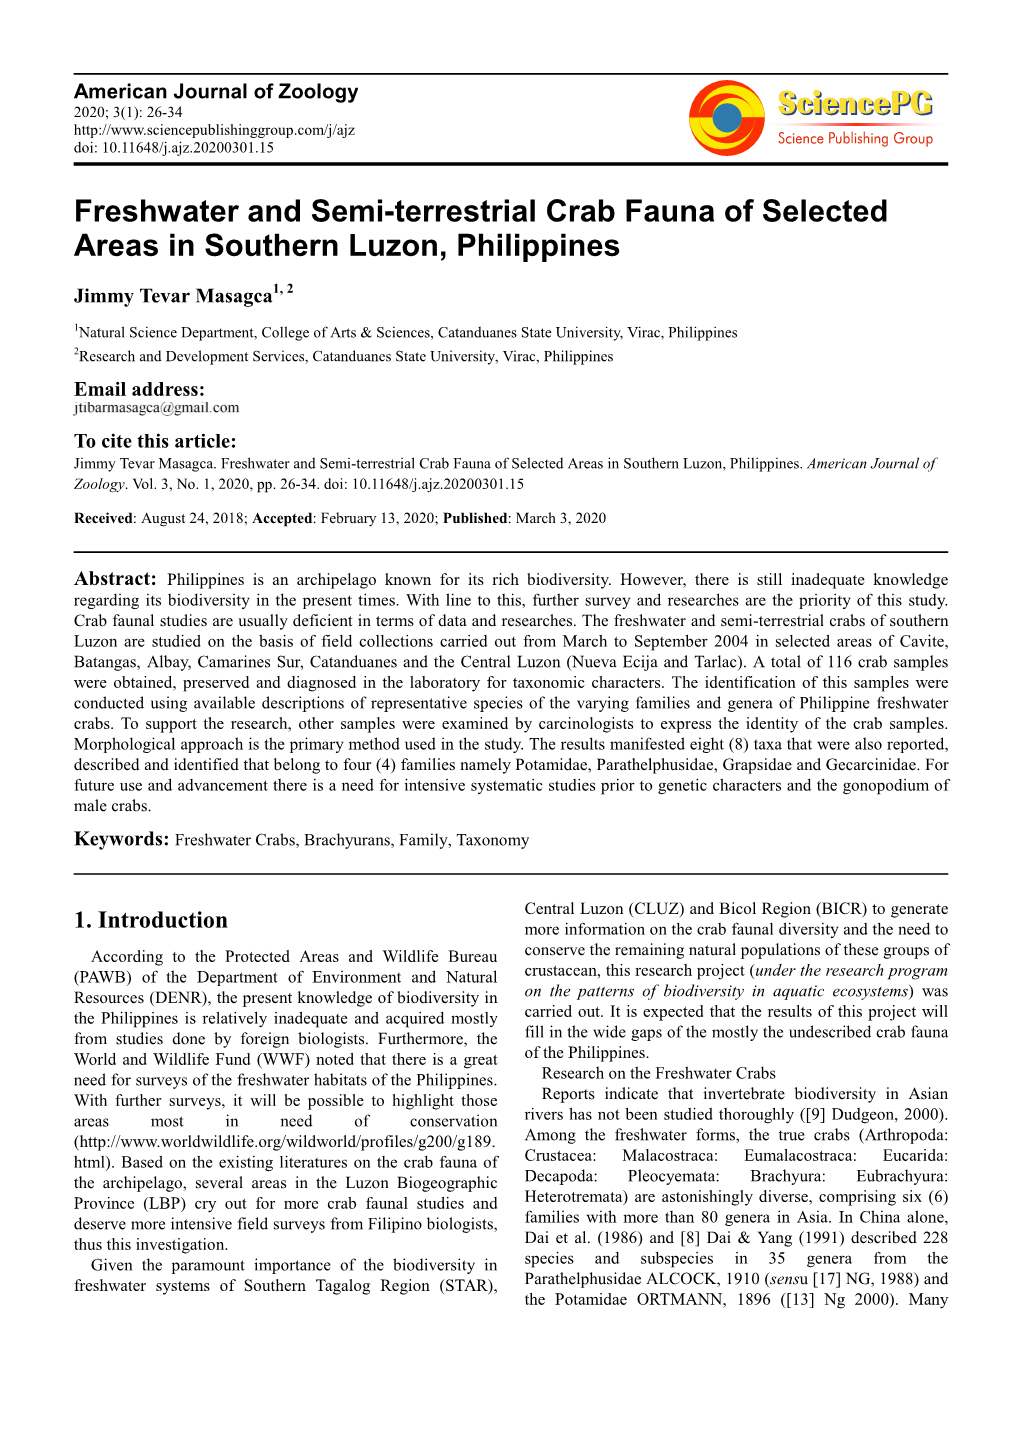 Freshwater and Semi-Terrestrial Crab Fauna of Selected Areas in Southern Luzon, Philippines